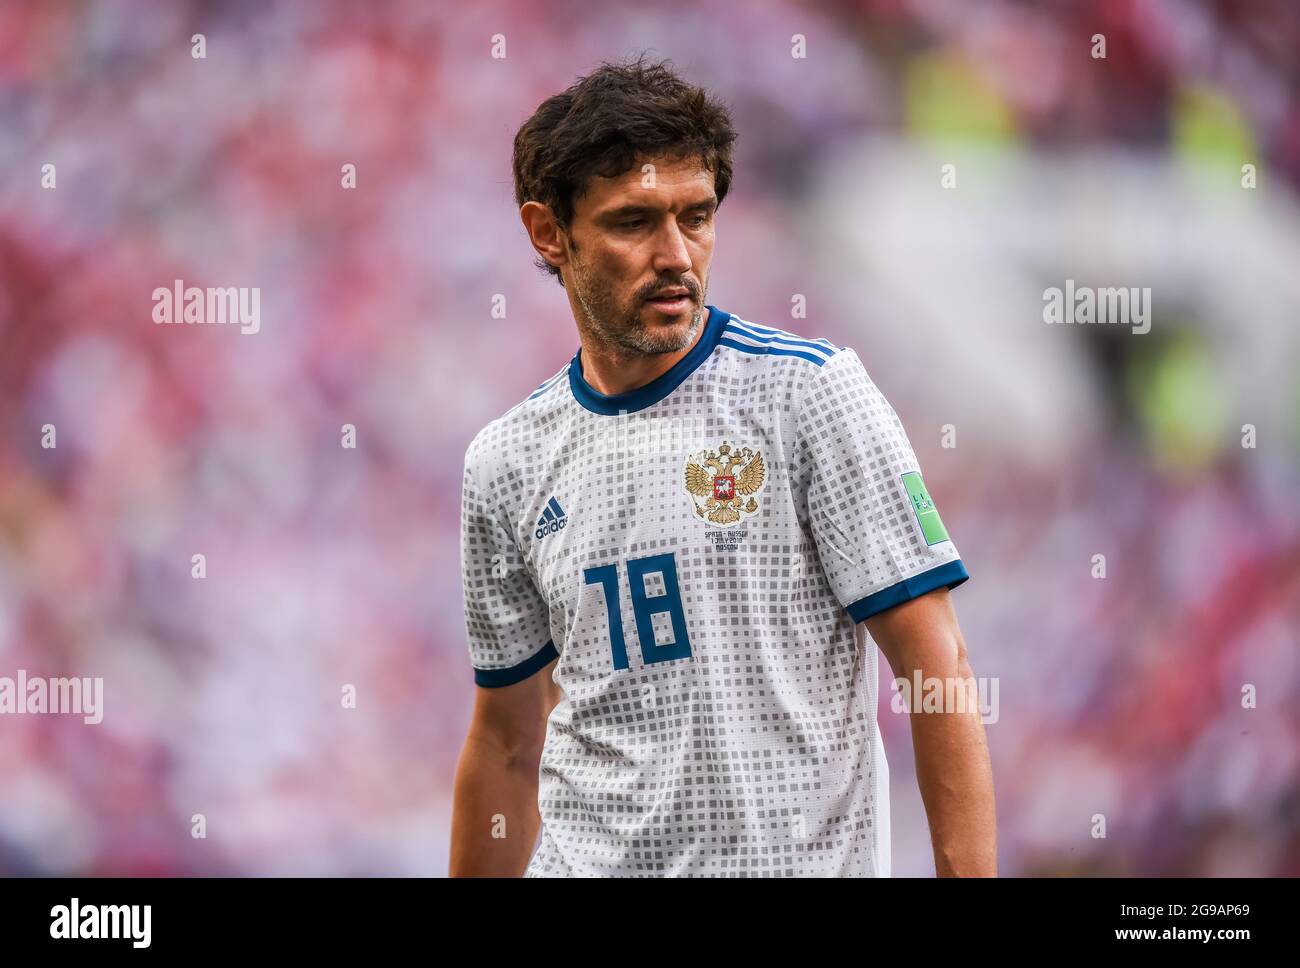 Moscow, Russia - July 1, 2018. Russia national football team midfielder Yury Zhirkov during FIFA World Cup 2018 Round of 16 match Spain vs Russia. Stock Photo